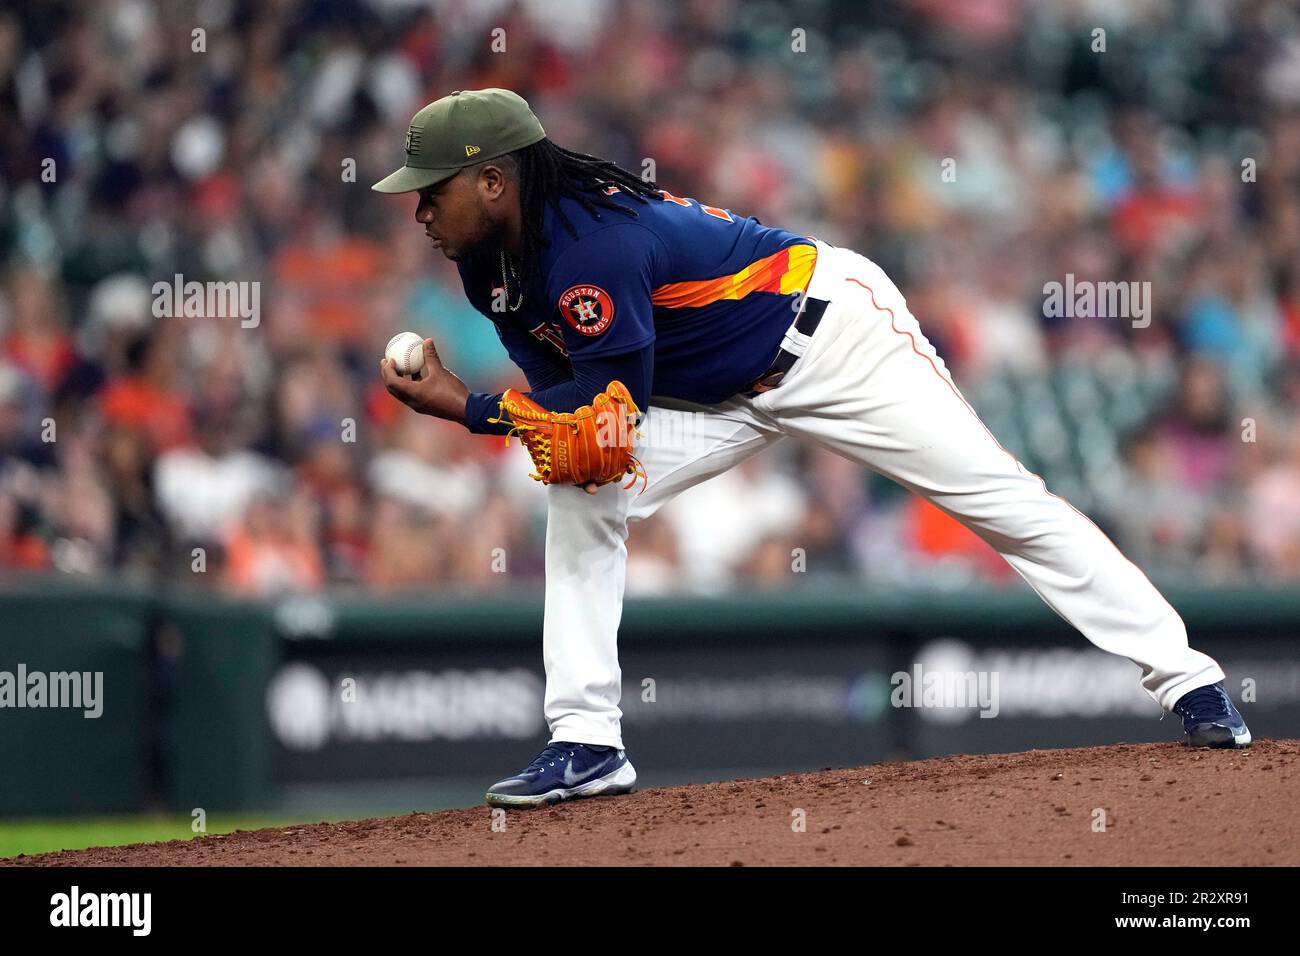 Houston Astros starting pitcher Framber Valdez (59) throws during the first  inning of MLB baseball action against the Toronto Blue Jays in Toronto on  Sunday, May 1, 2022. THE CANADIAN PRESS/Christopher Katsarov